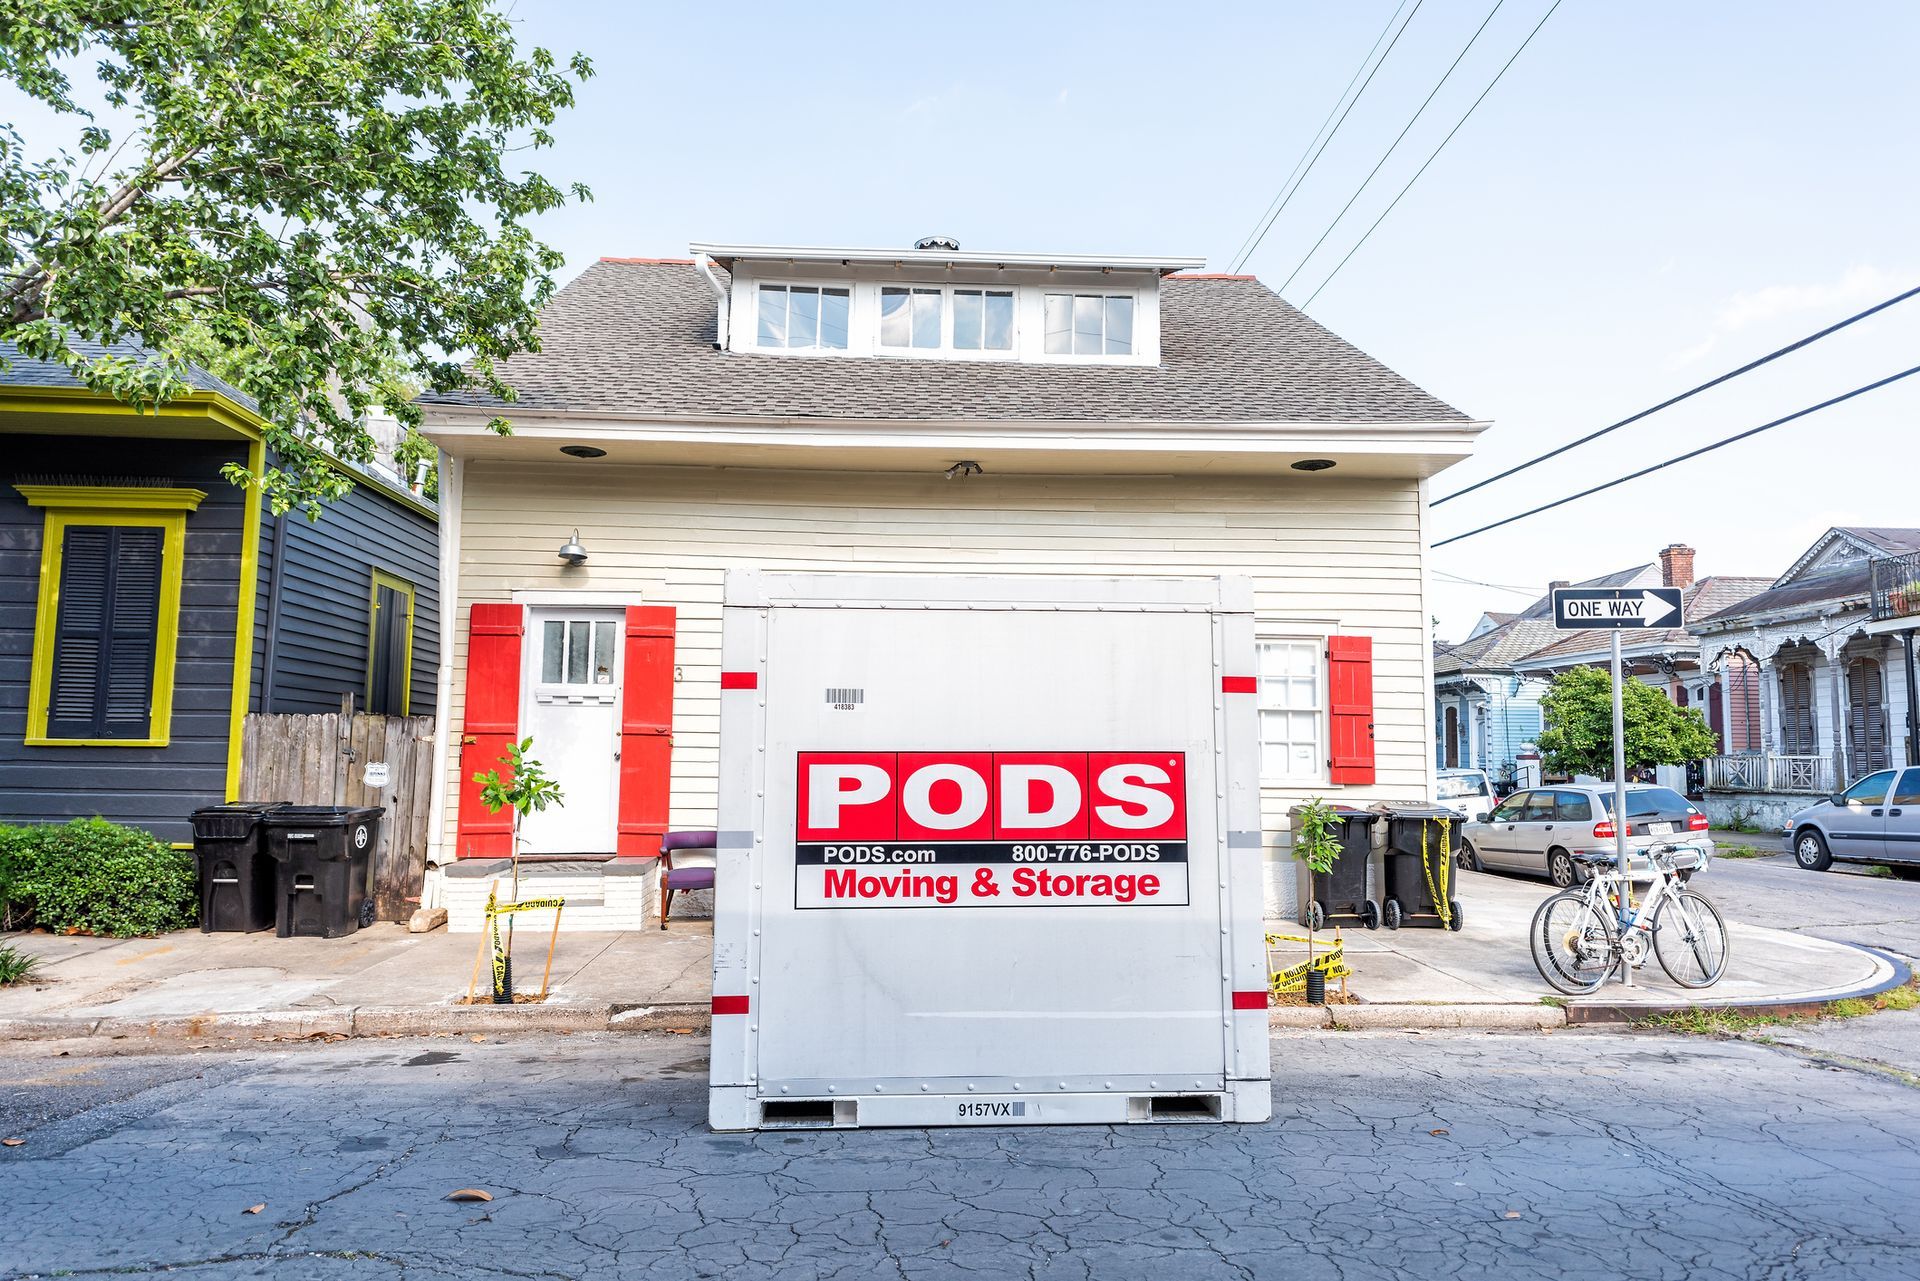 A pods moving and storage trailer is parked in front of a house.